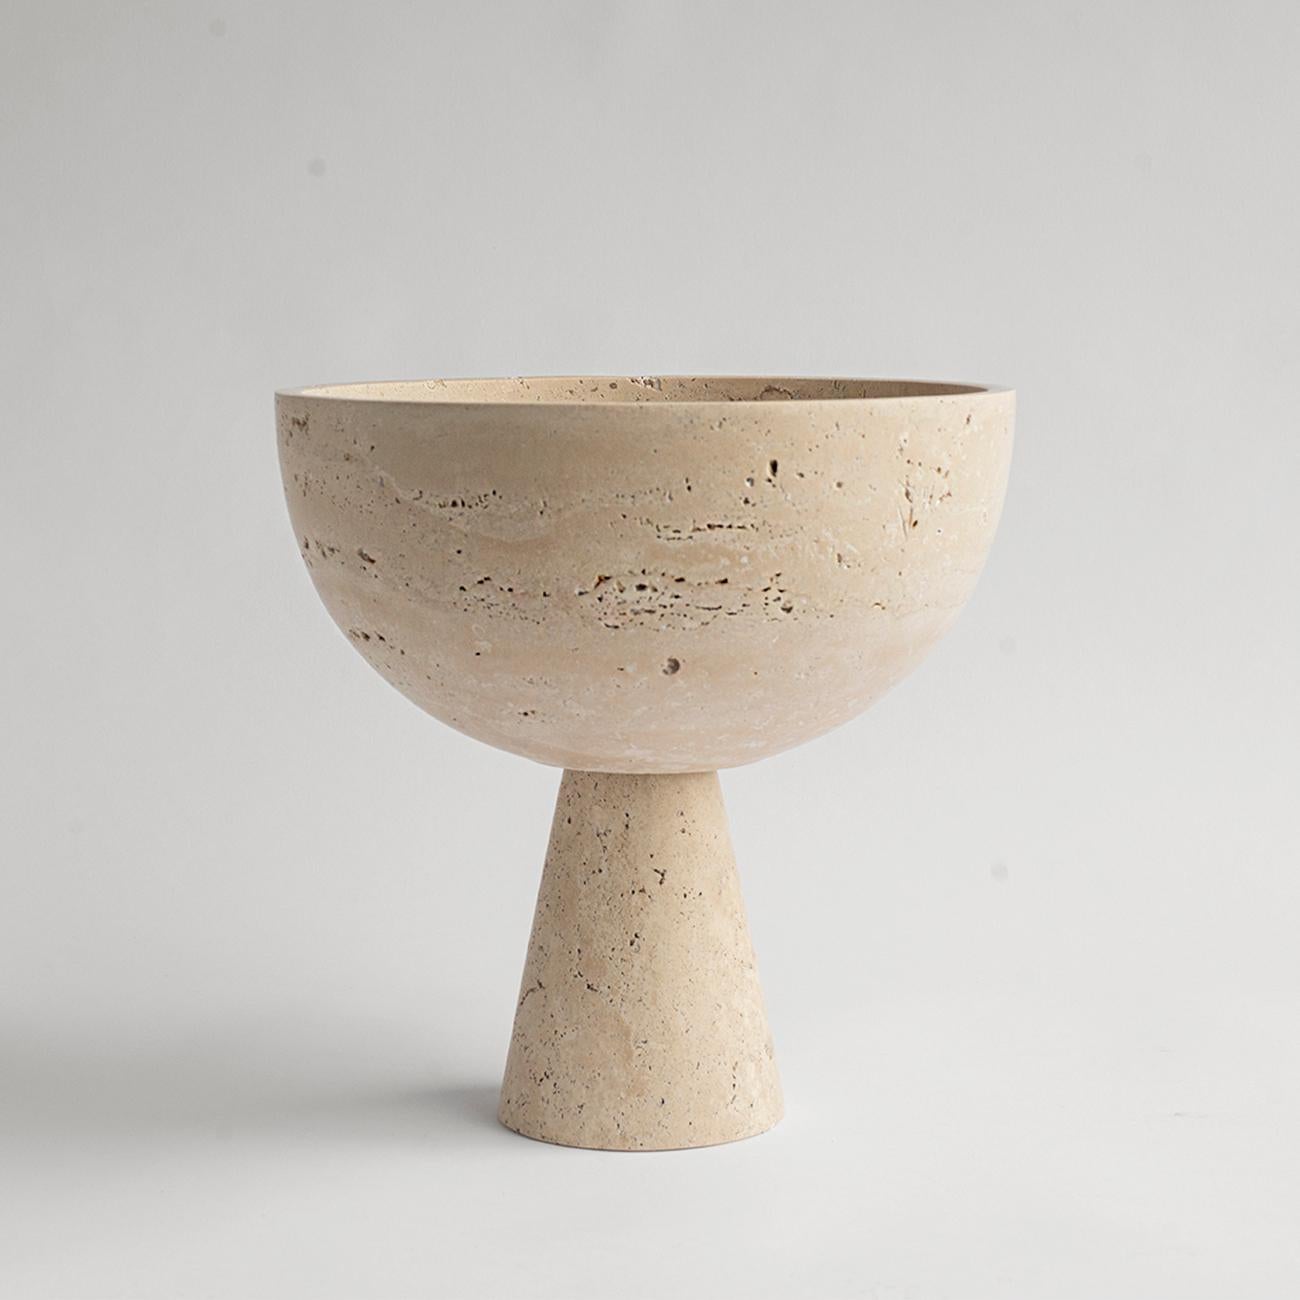 A substantial travertine bowl with unique structure rests atop a pedestal for a grand presentation of fruits and vegetables. 

Due to the nature of the material, each piece may vary slightly in appearance. We encourage embracing the variations that